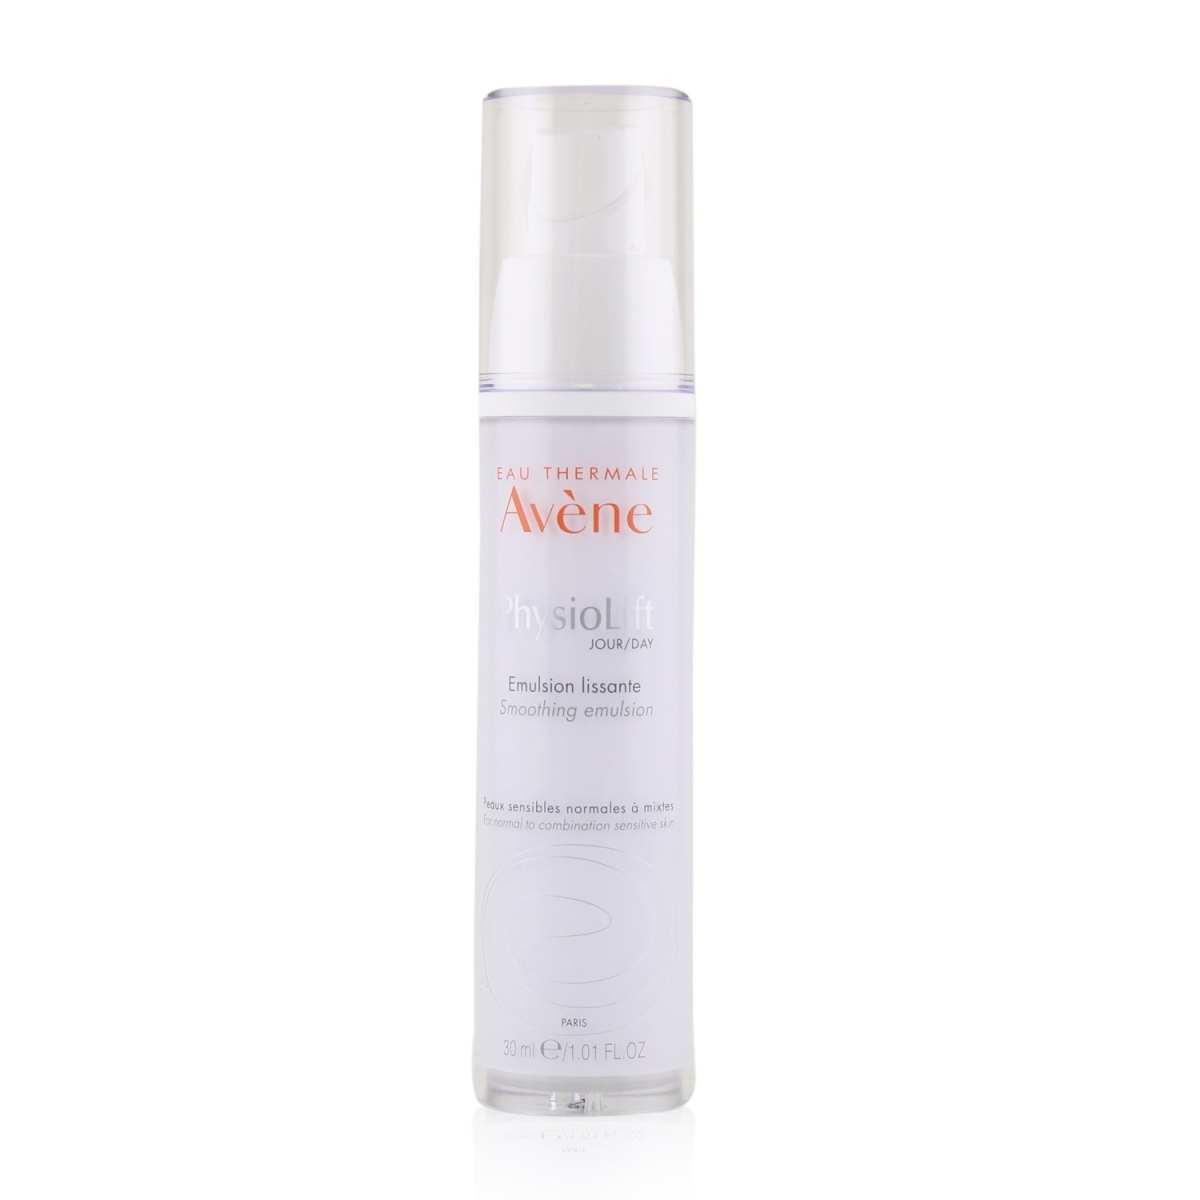 Picture of Avene 244676 1 oz PhysioLift Day Smoothing Emulsion for Normal to Combination Sensitive Skin